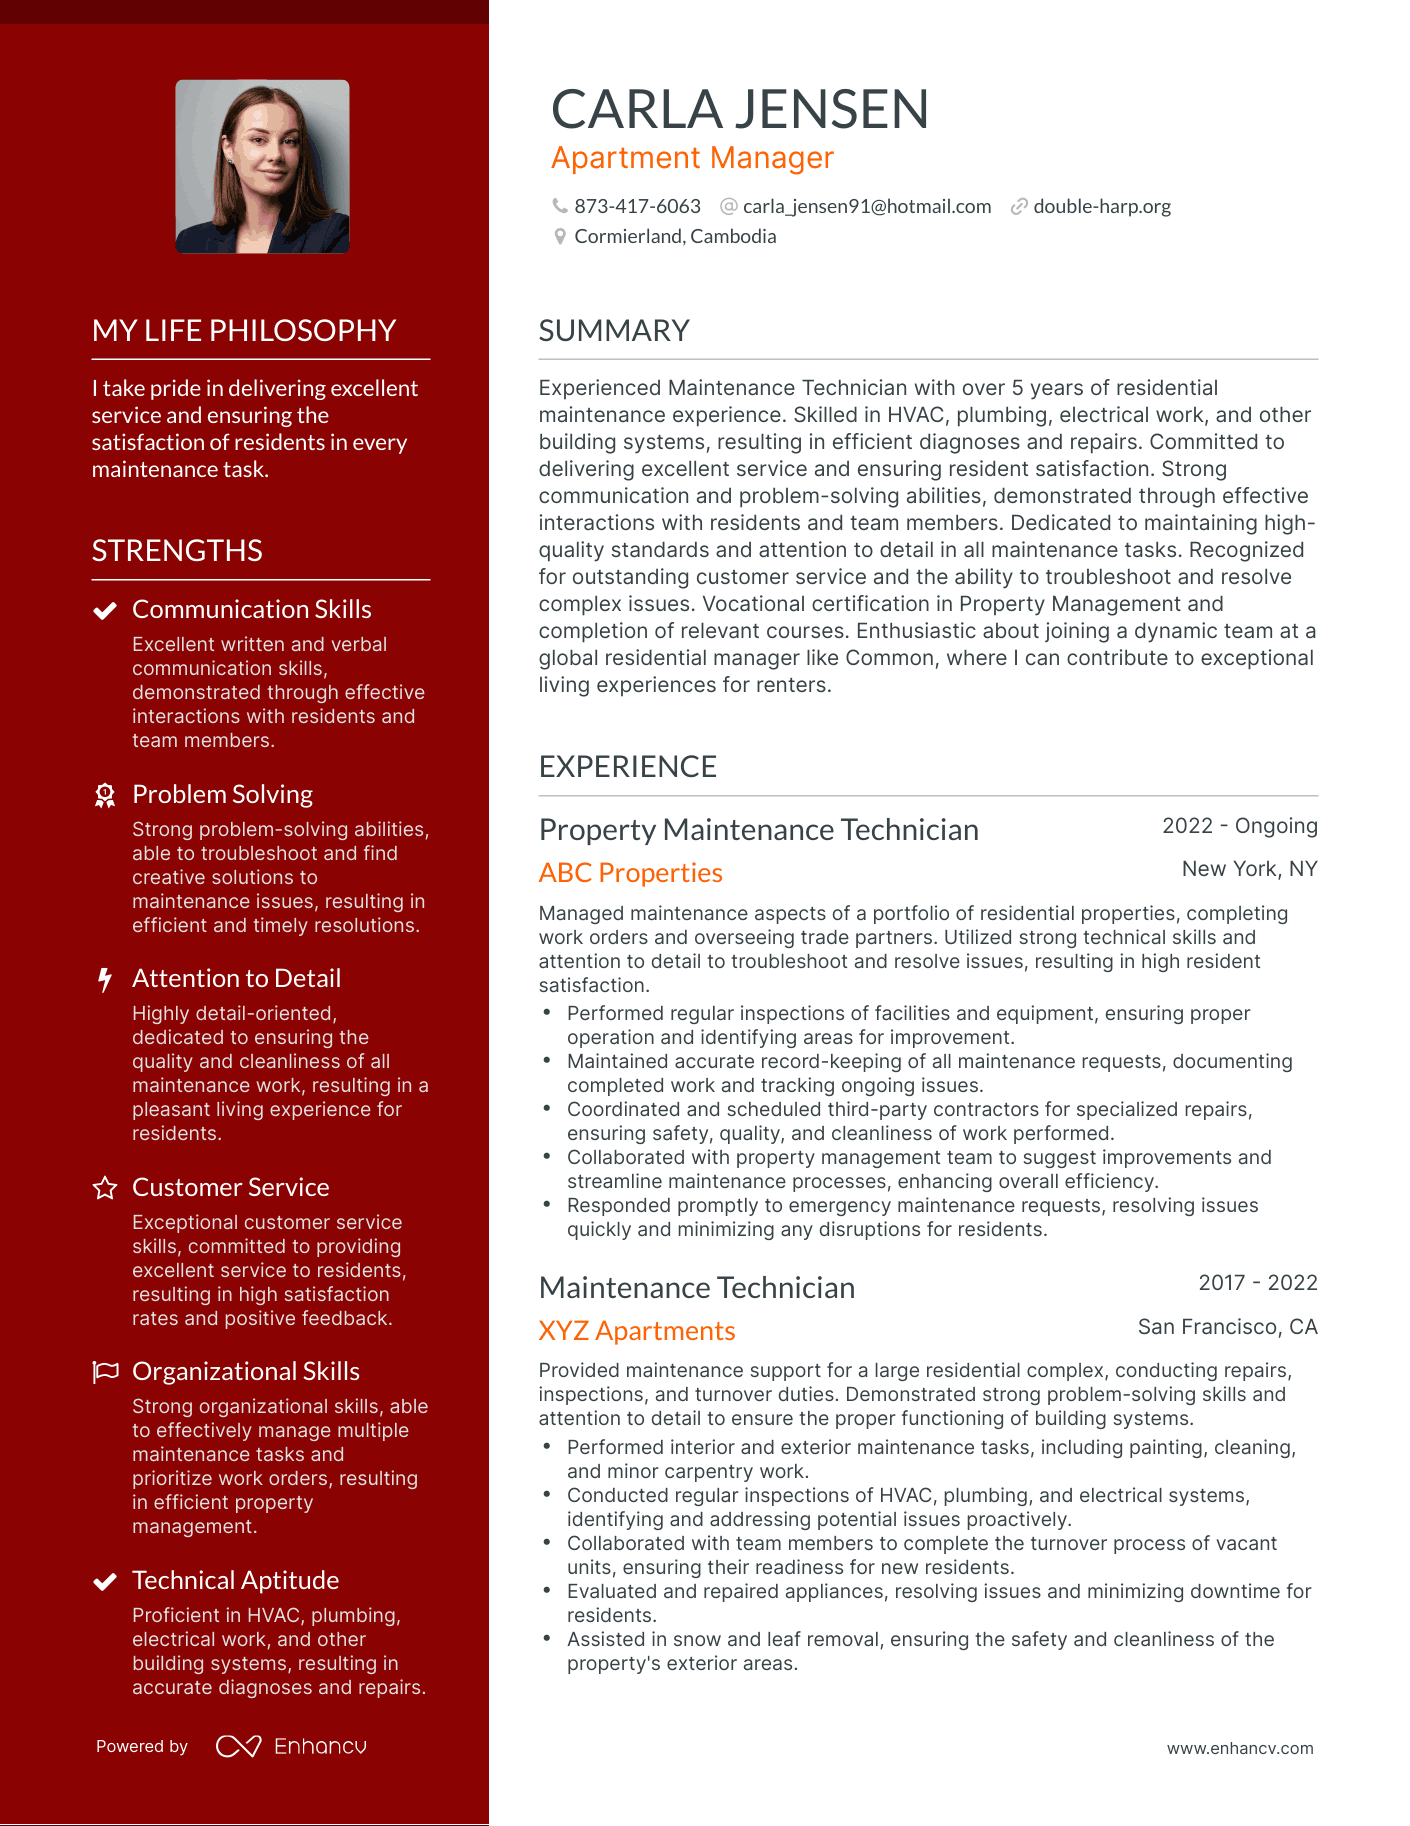 Apartment Manager resume example